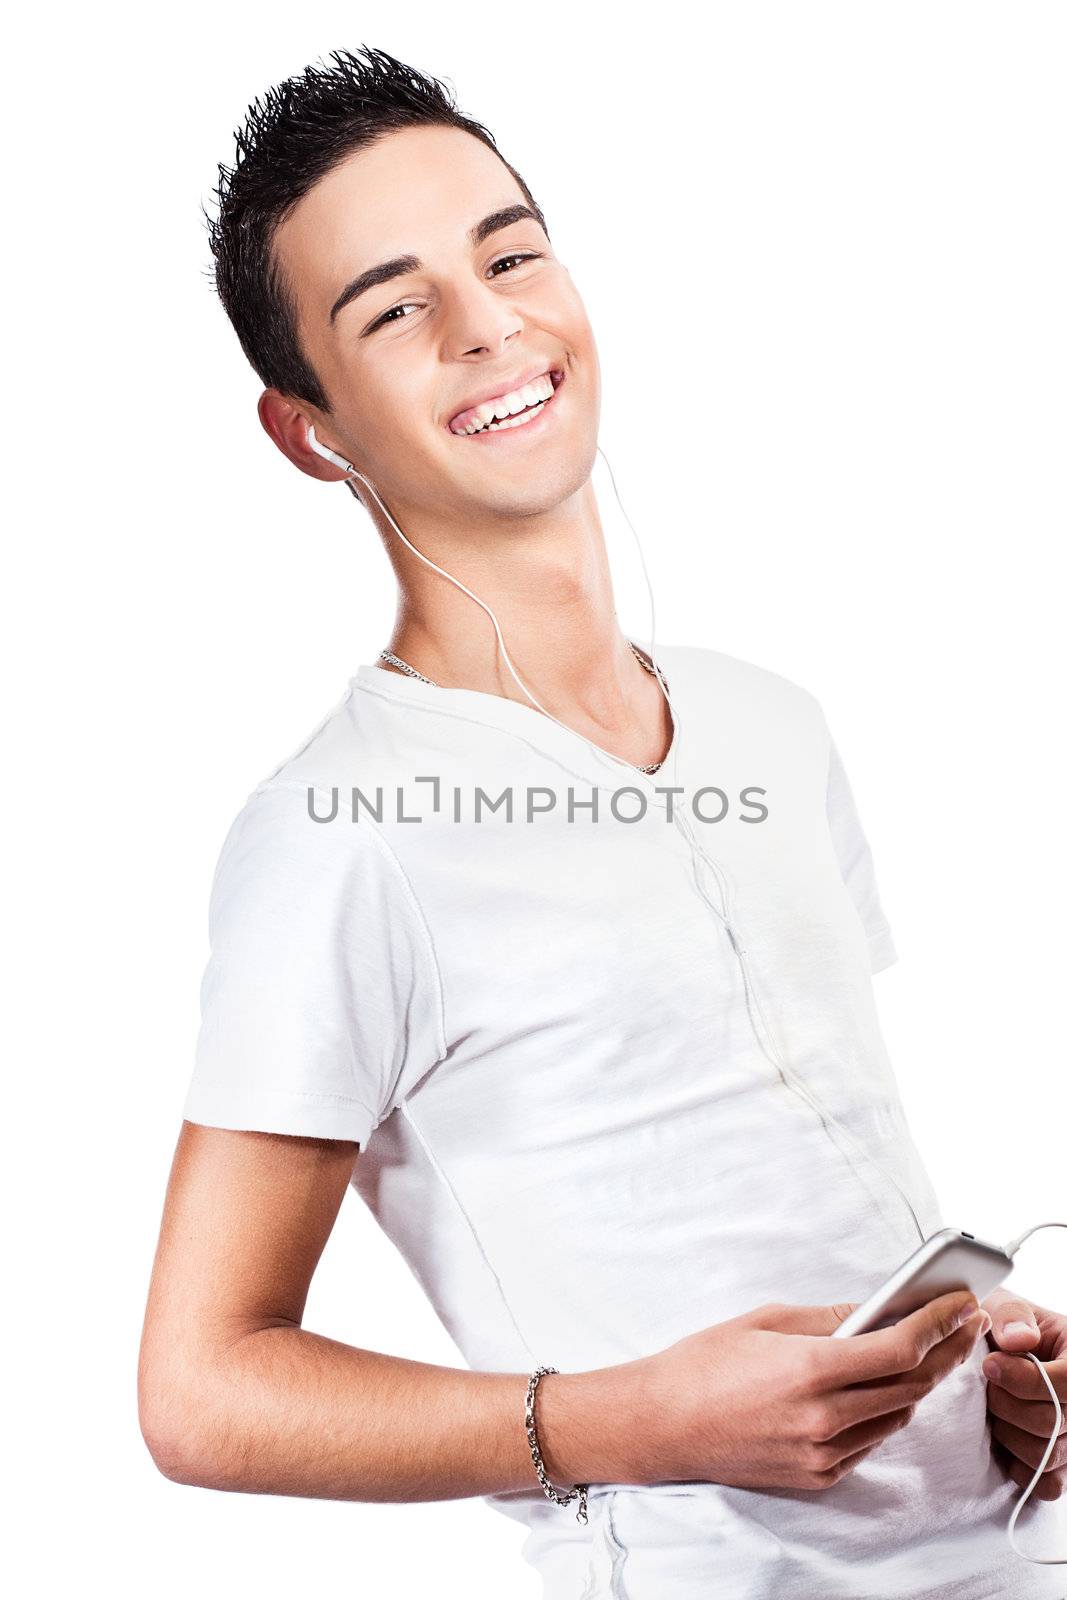 young man with headphones listening music, isolated on white background